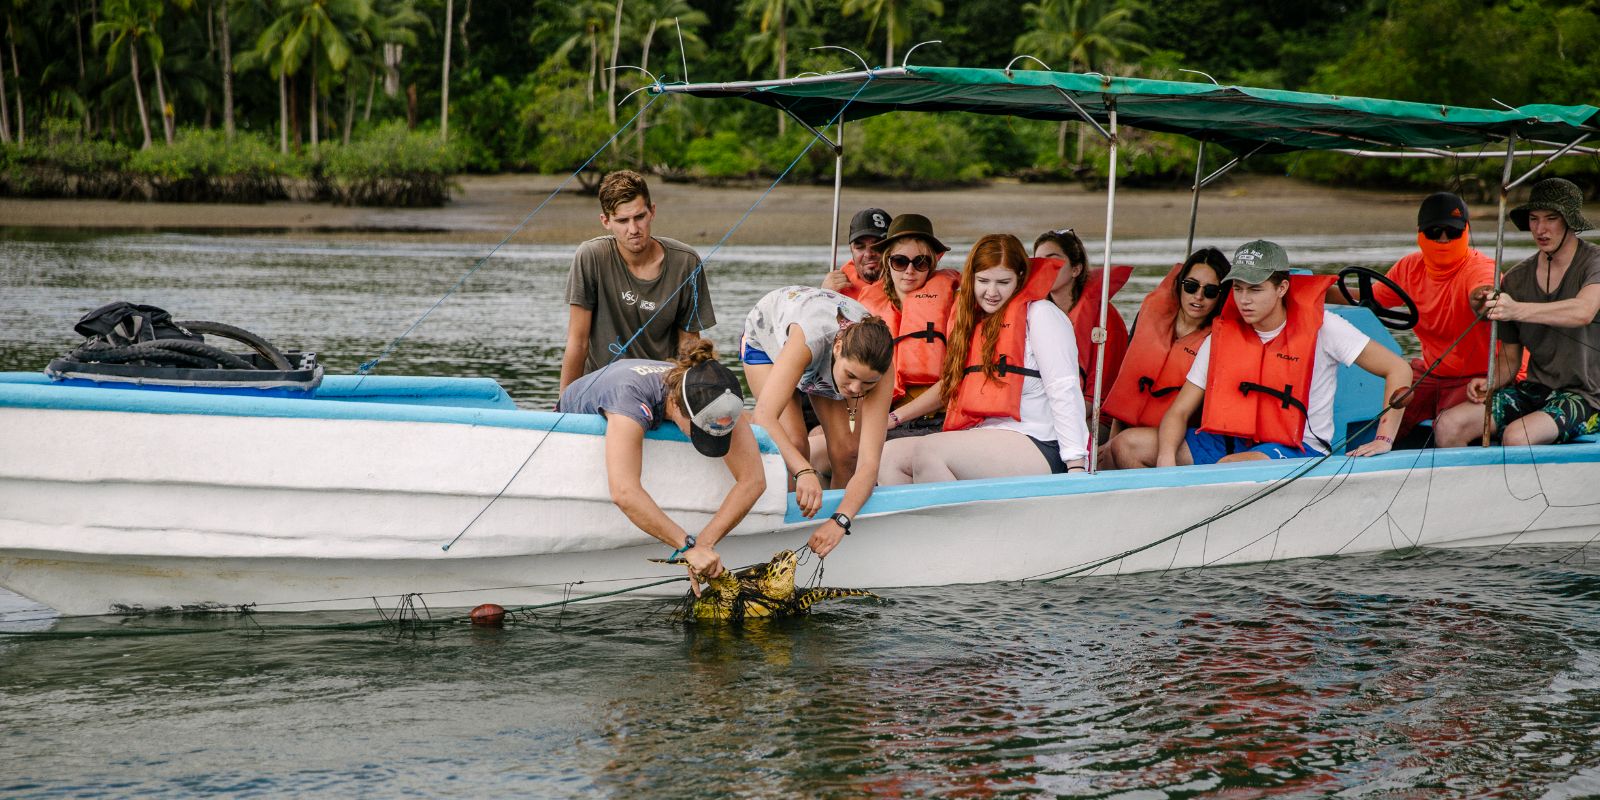 A group of young adults on a boat wearing life jackets, actively engaged in a river cleanup, with tropical vegetation in the background.